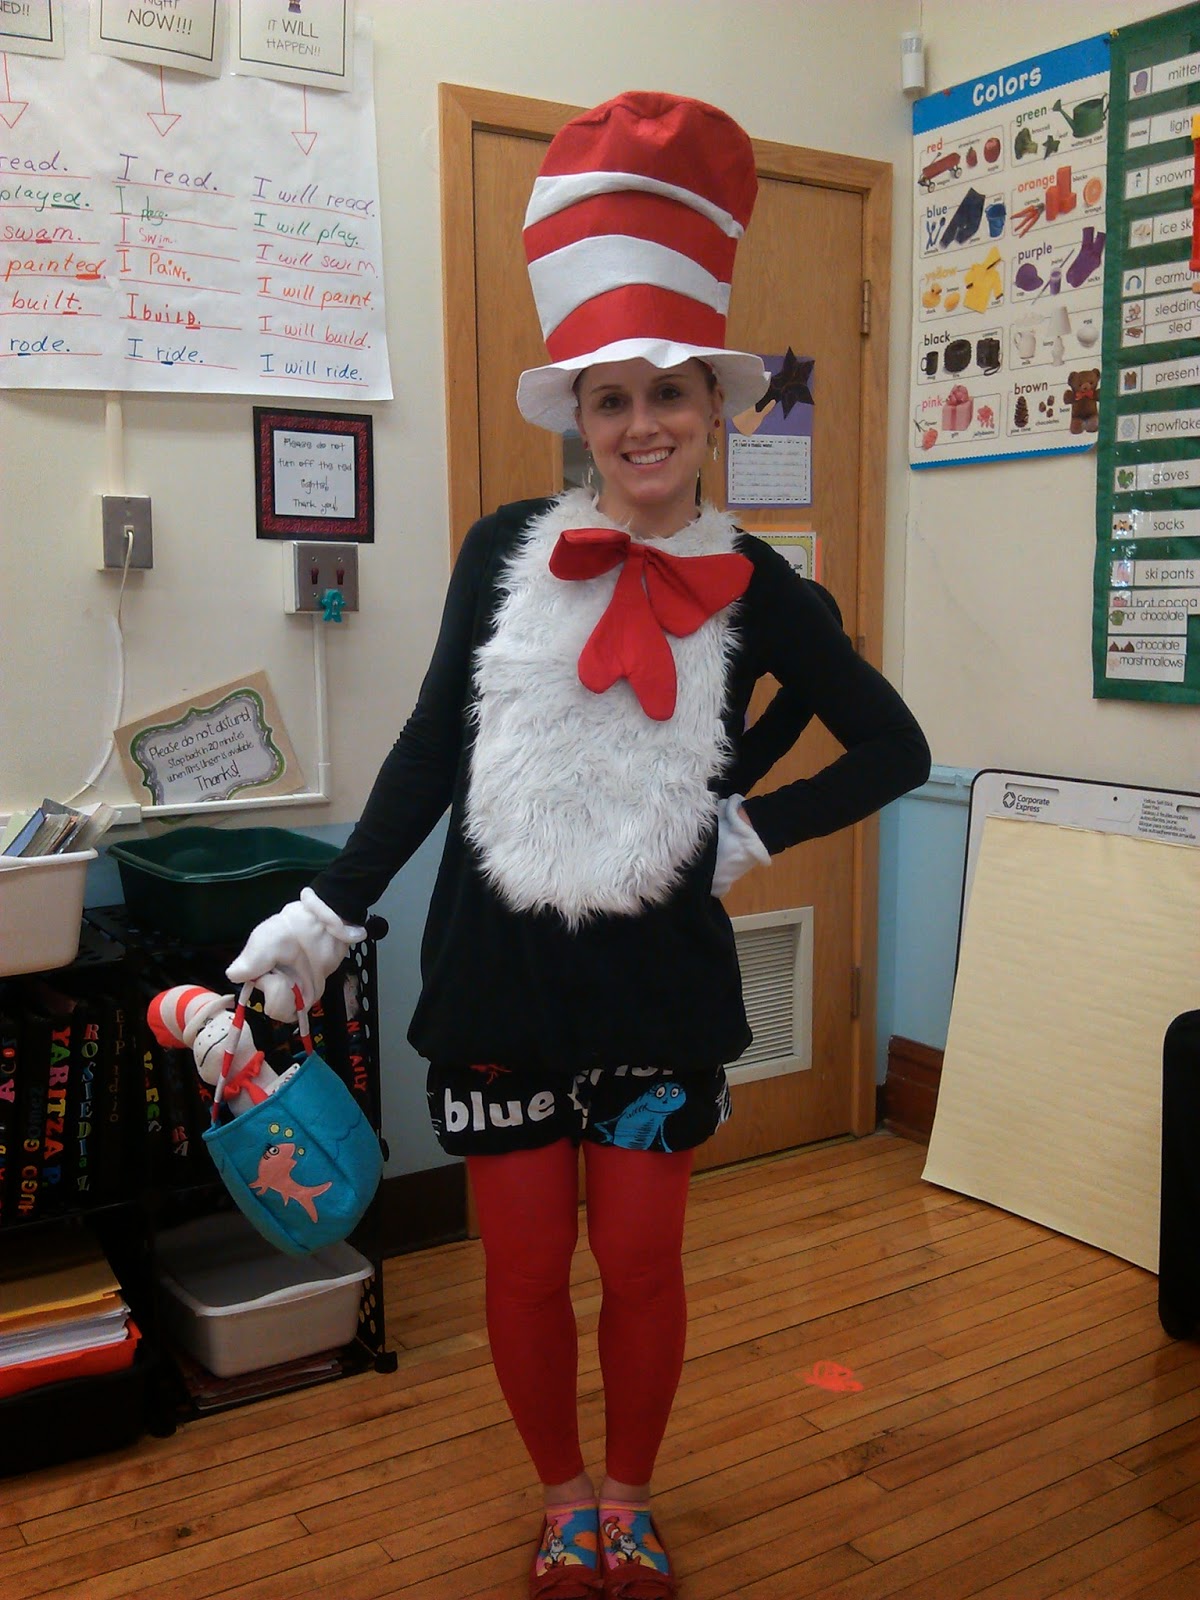 Pin by Sue Hofer on Costumes | Dr seuss costumes, Dr costume, Teacher ...